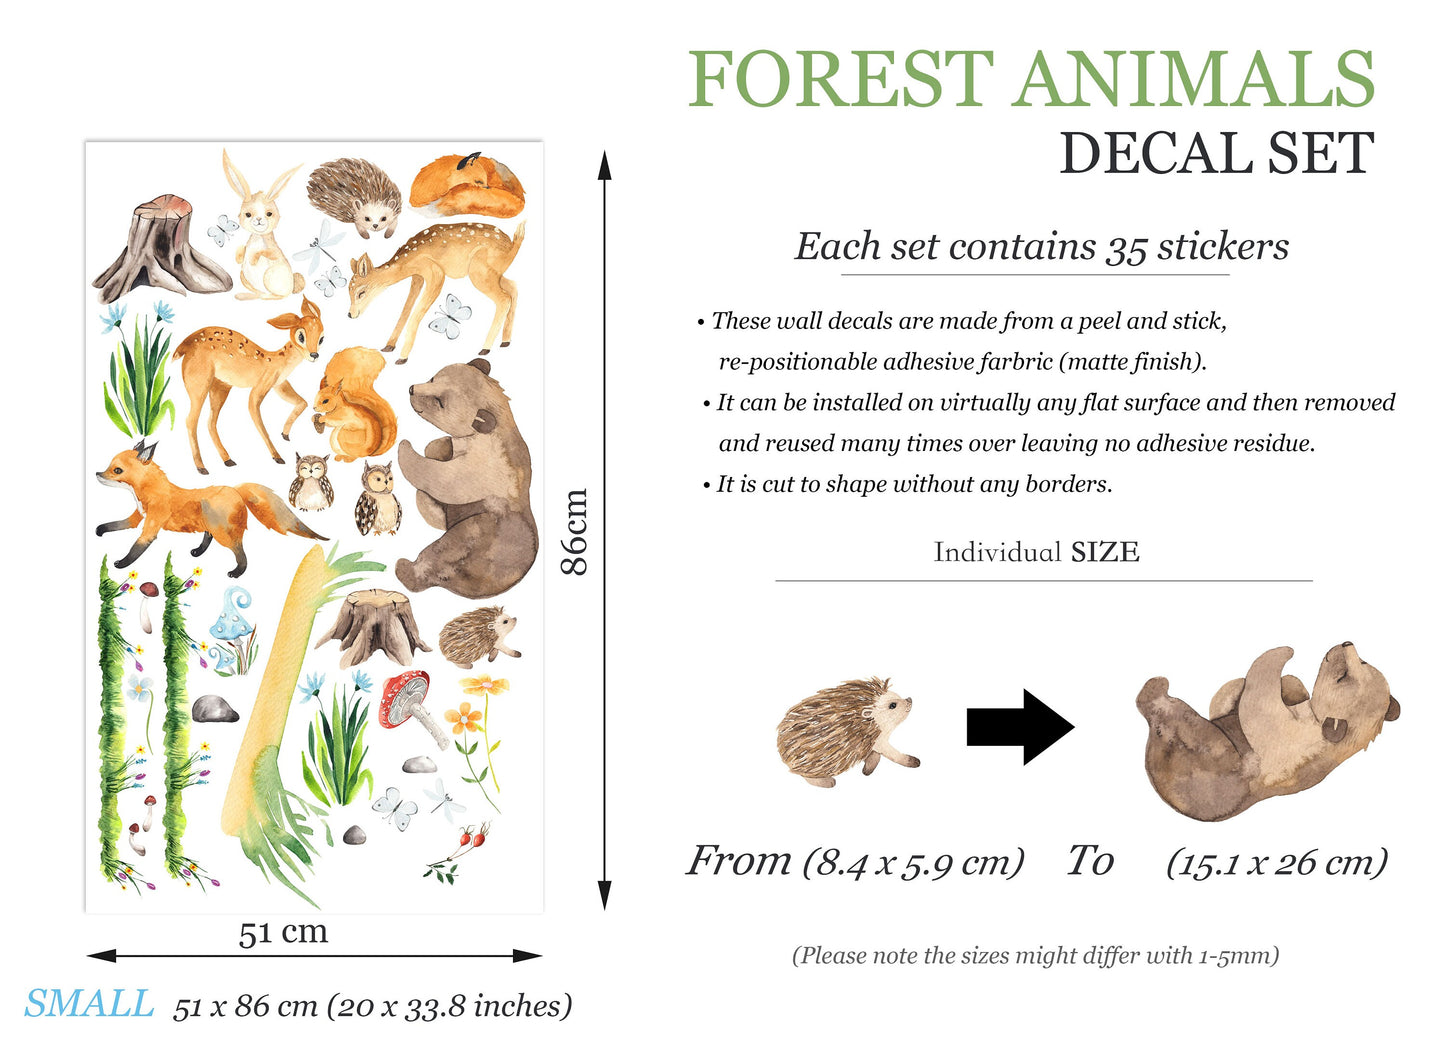 Forest Animals Wall Decal - Bear Playing with Butterflies, Fox Running with Owl, Rabbit on Tree Stump - BR207